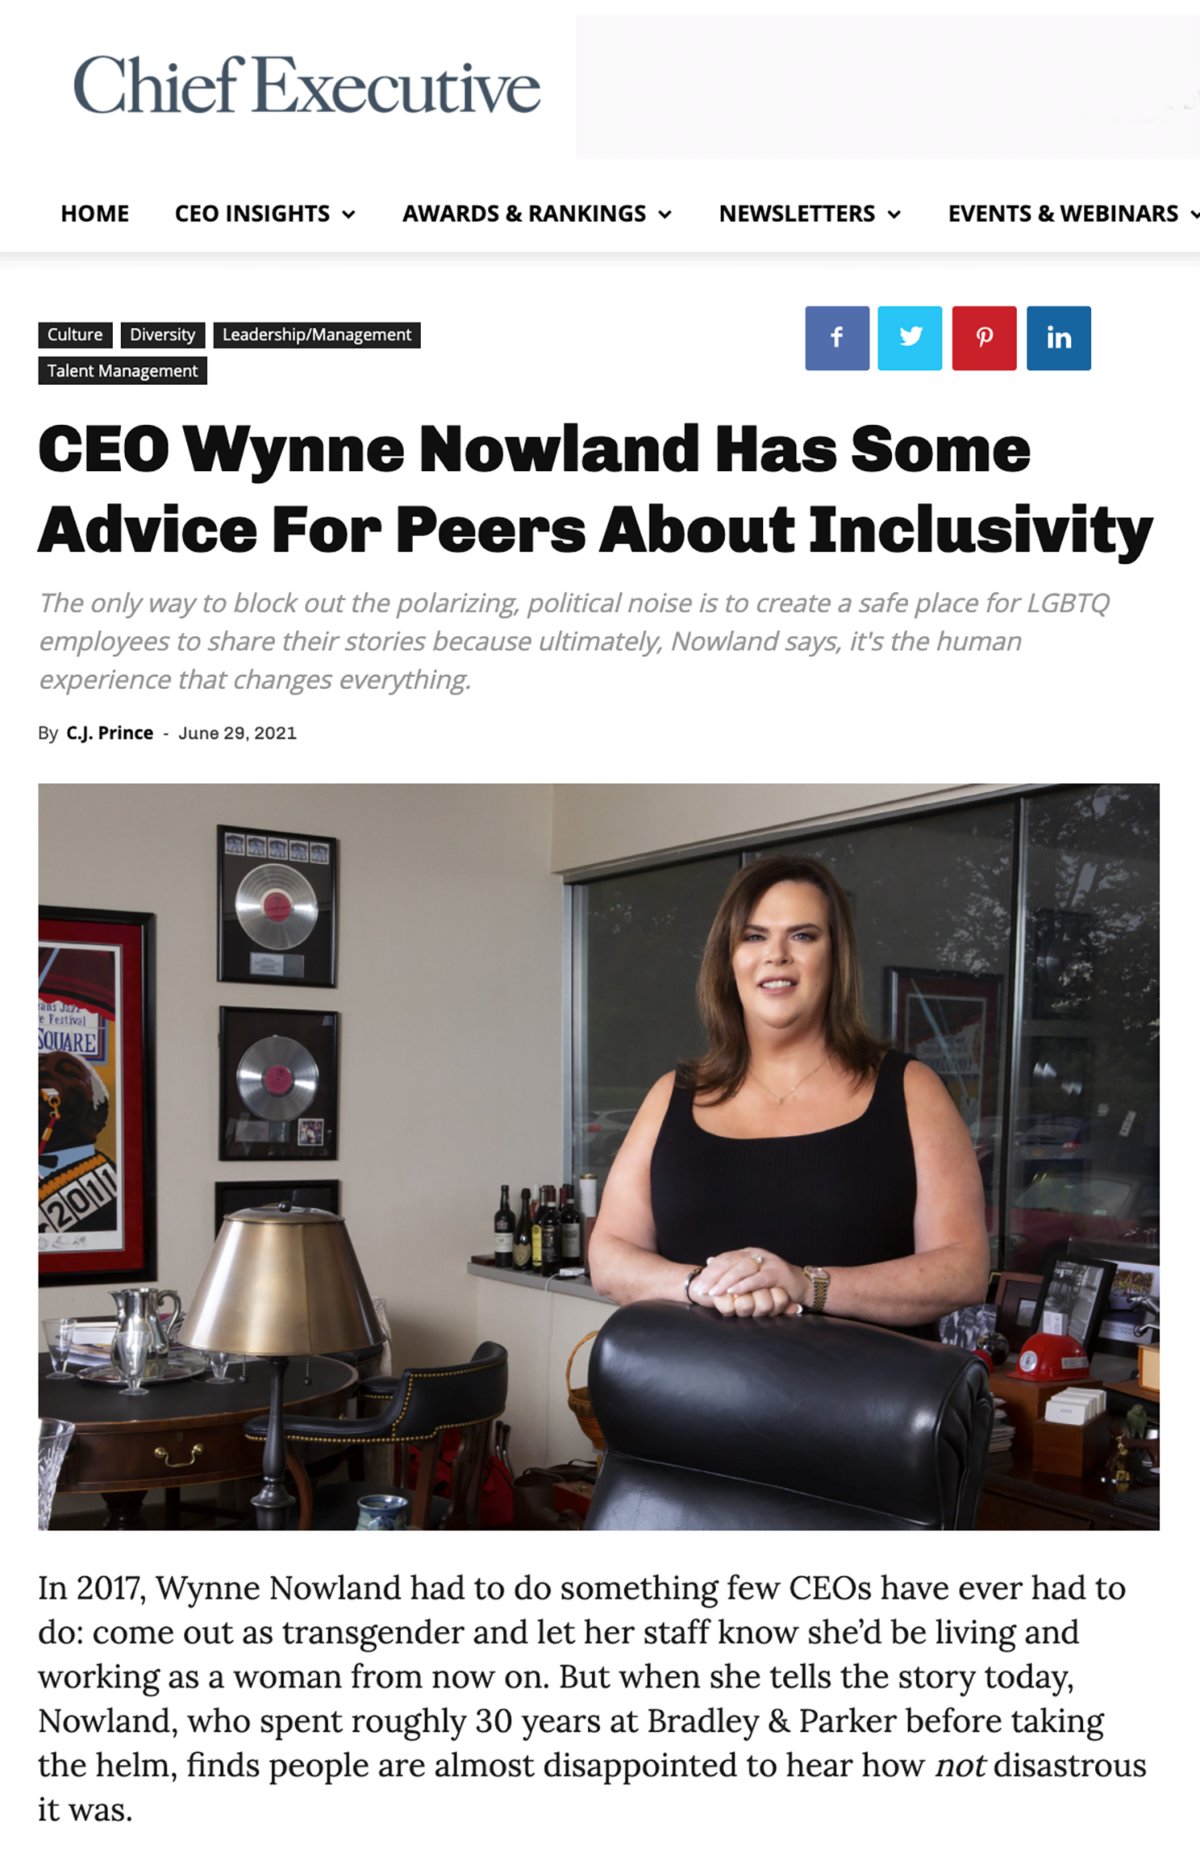 Chief Executive Publishes Feature Article on CEO Wynne Nowland